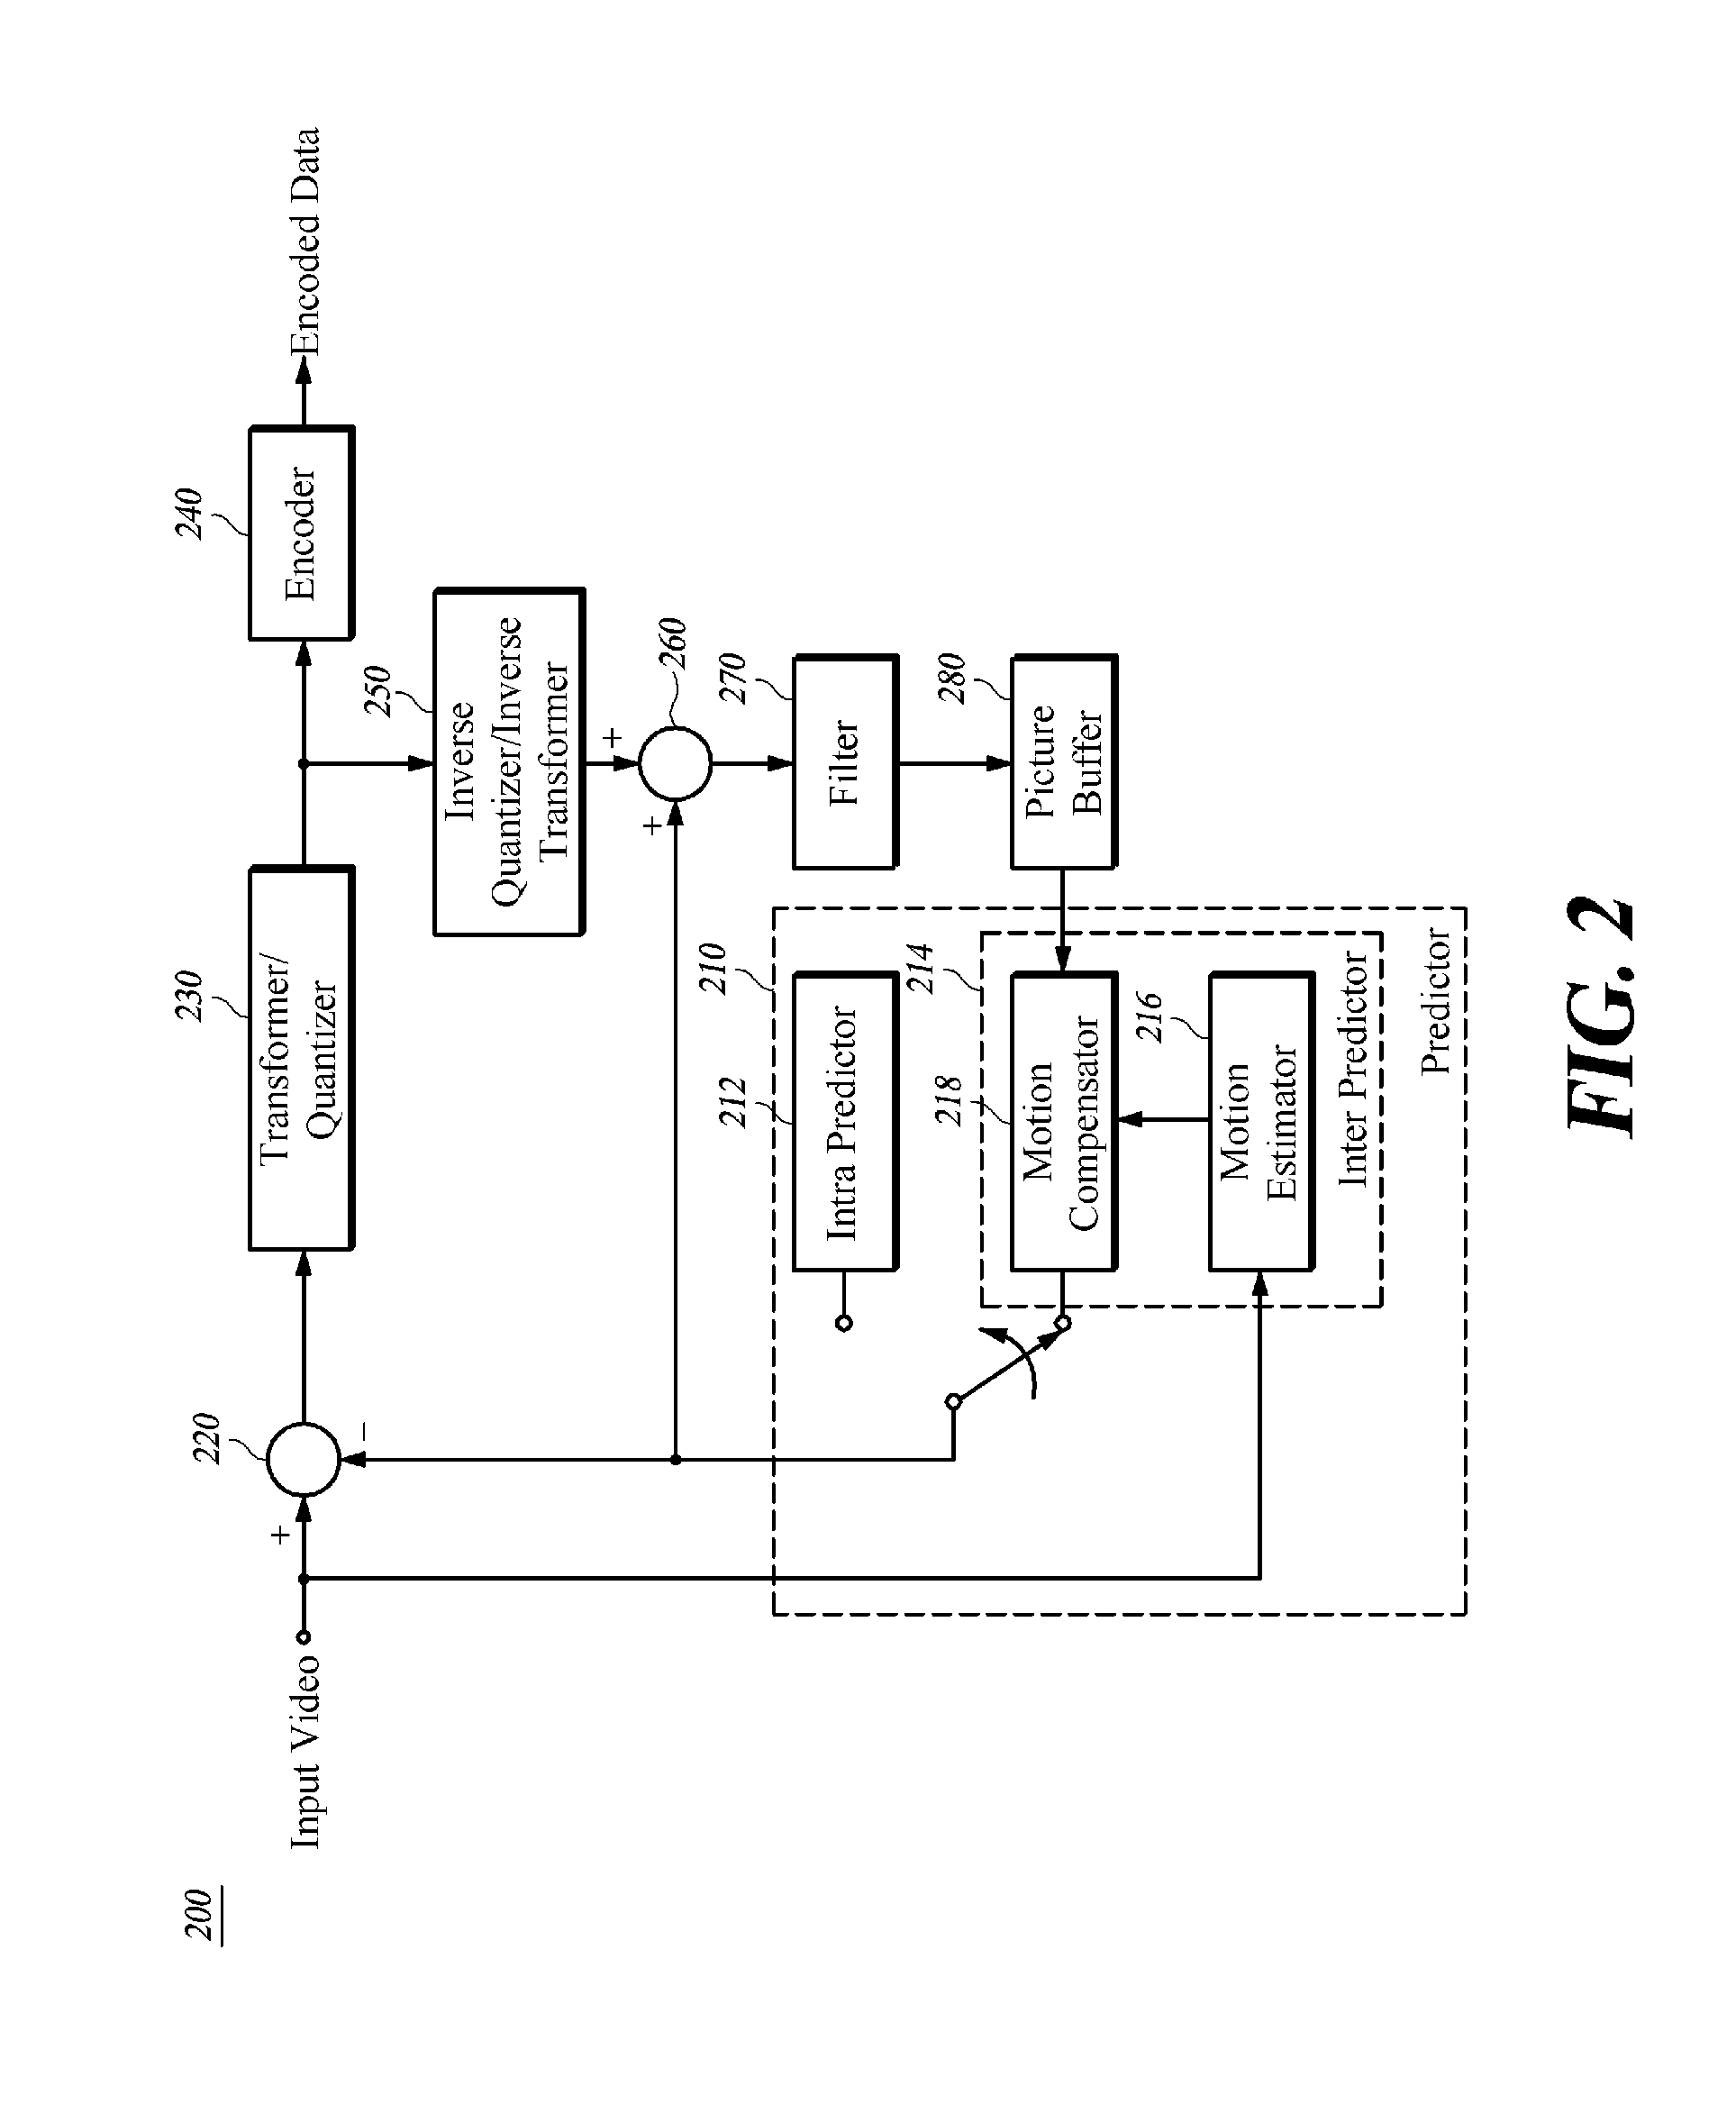 Apparatus and method for encoding/decoding images